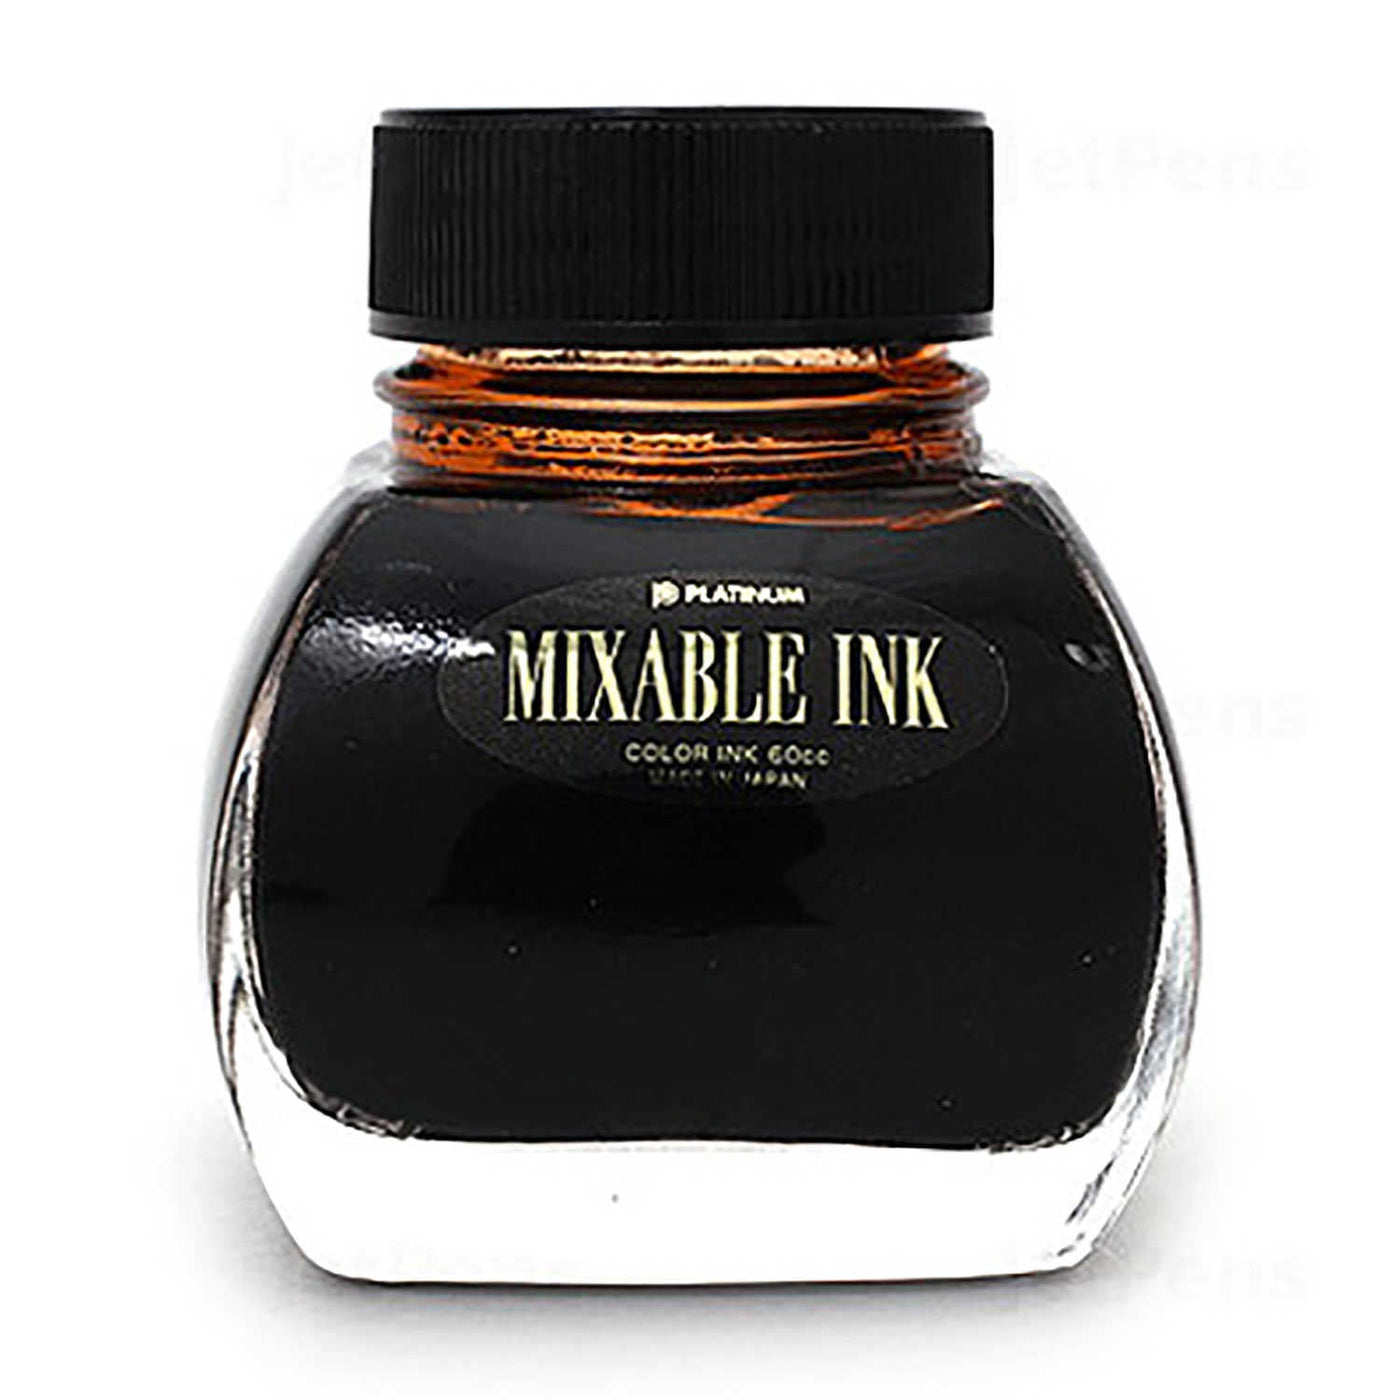 Platinum Mixable Earth Brown Ink Bottle Brown - 60ml